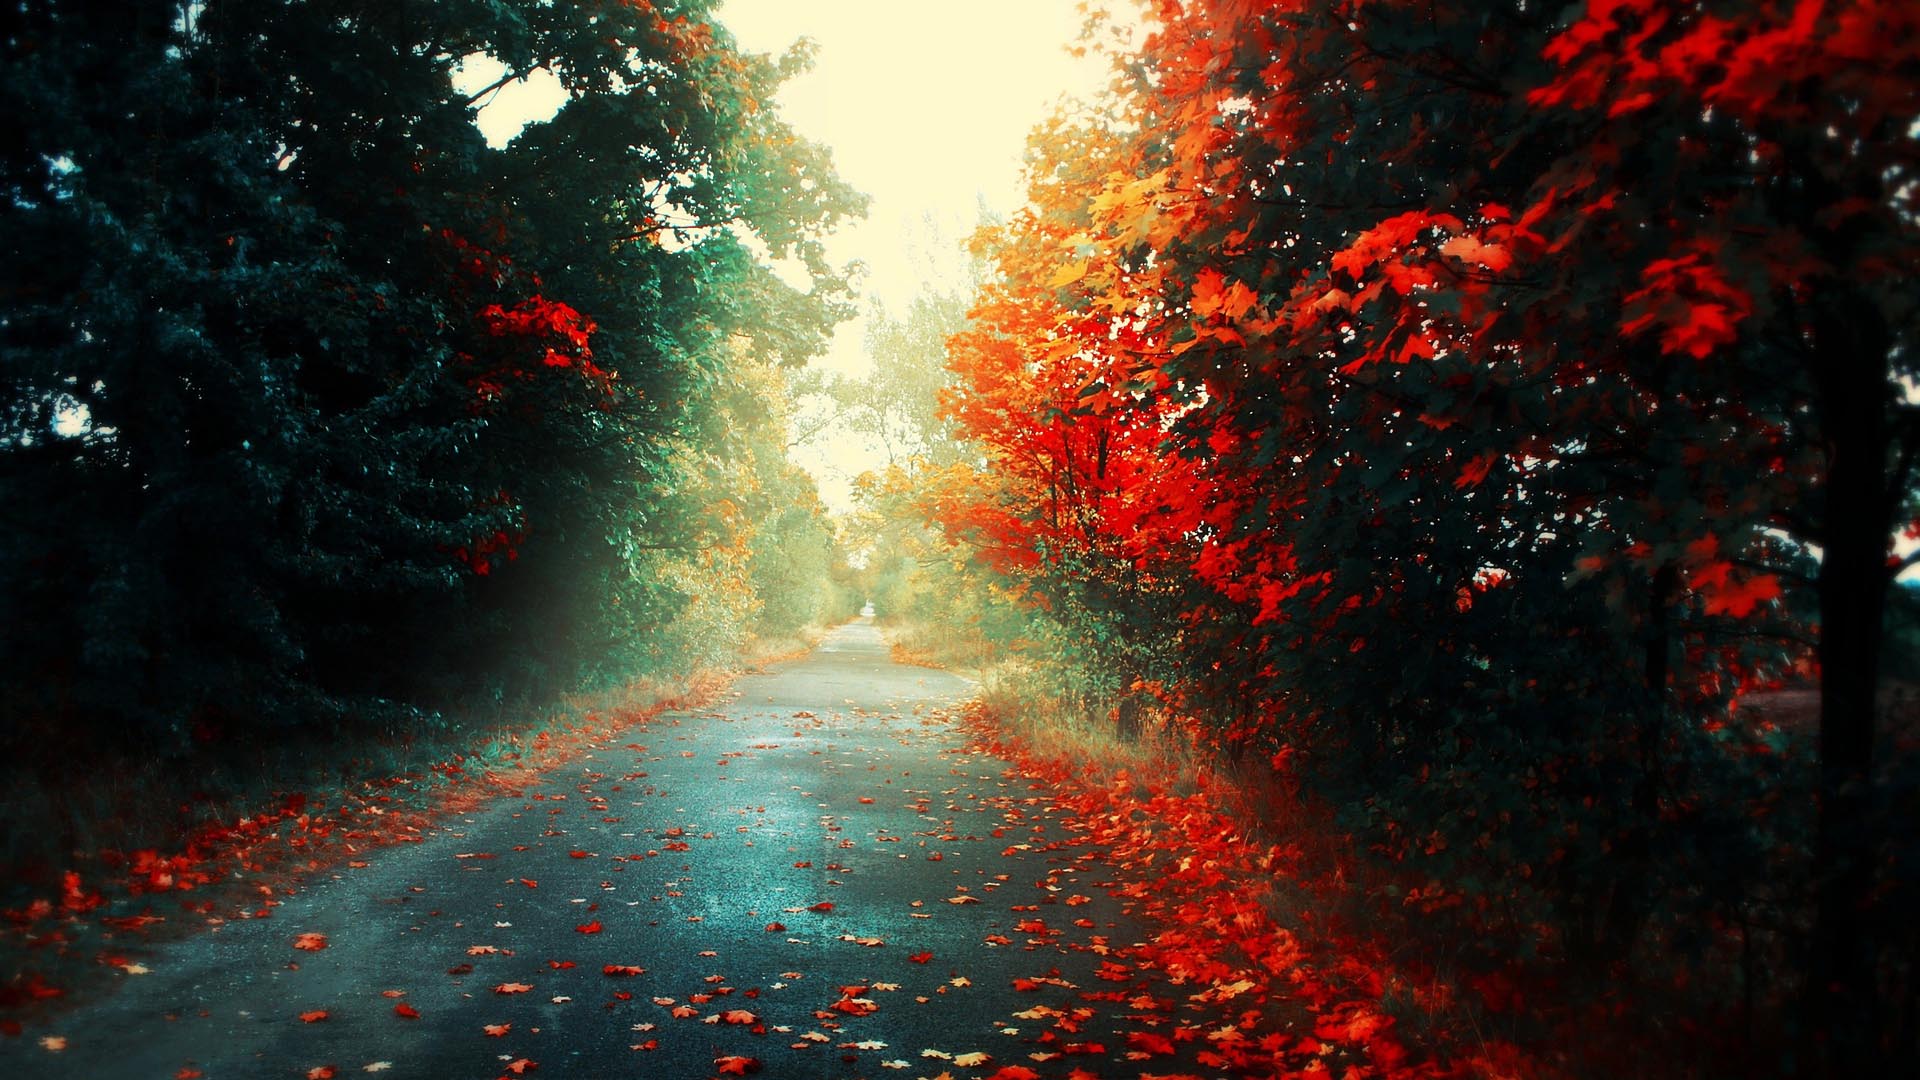 Free Download Colorful Autumn Road Hd Wallpaper Fullhdwpp Full Hd Wallpapers [1920x1080] For